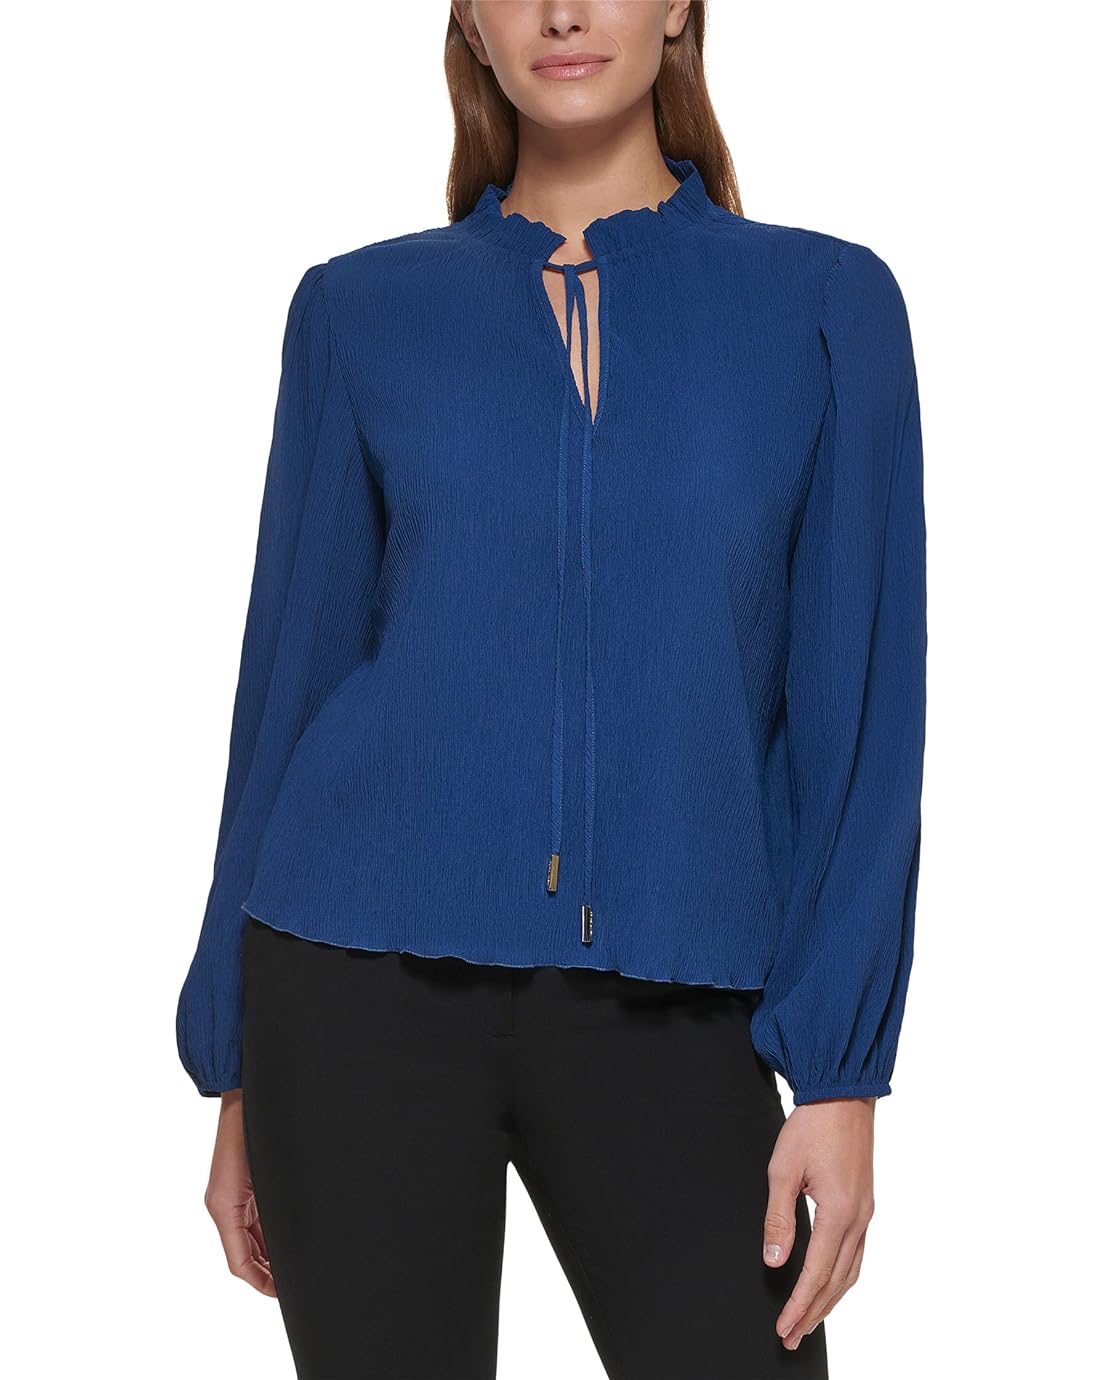 DKNY Long Sleeve Pleated Top with Neck Tie